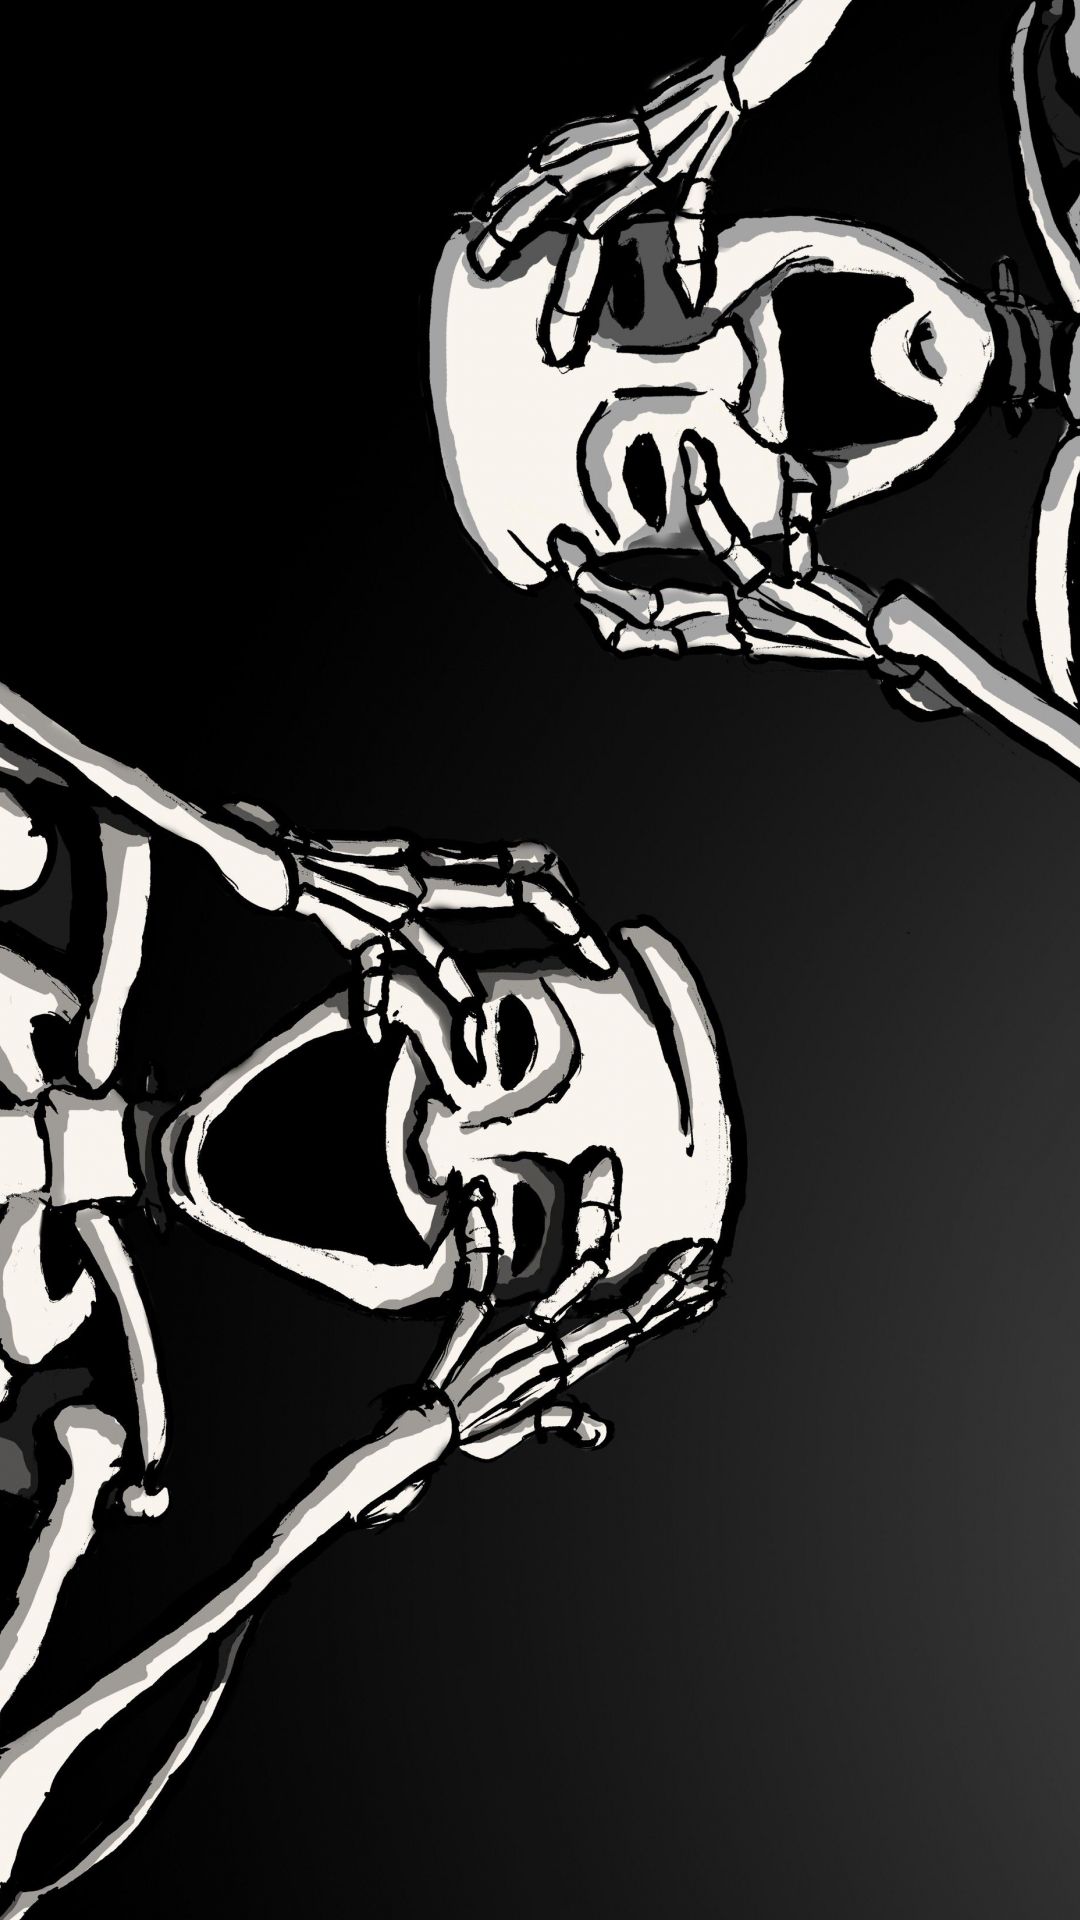 A pair of skeleton's facing each other on a black background - Skeleton